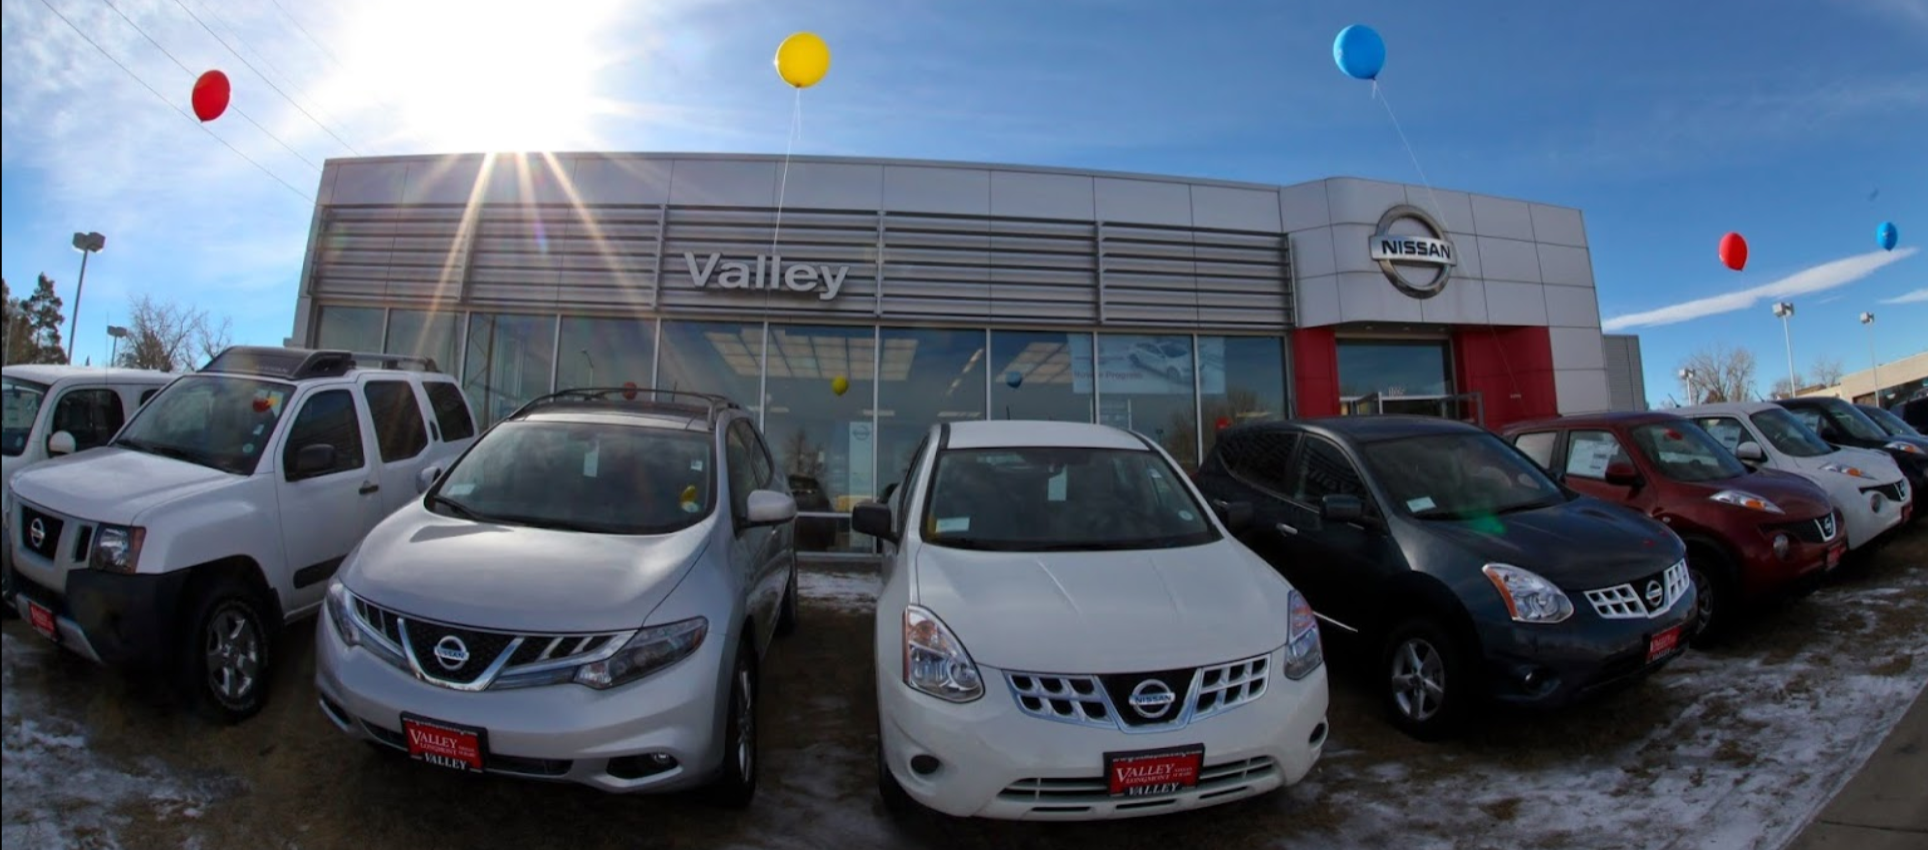 Learn More About Valley Nissan in Longmont, CO